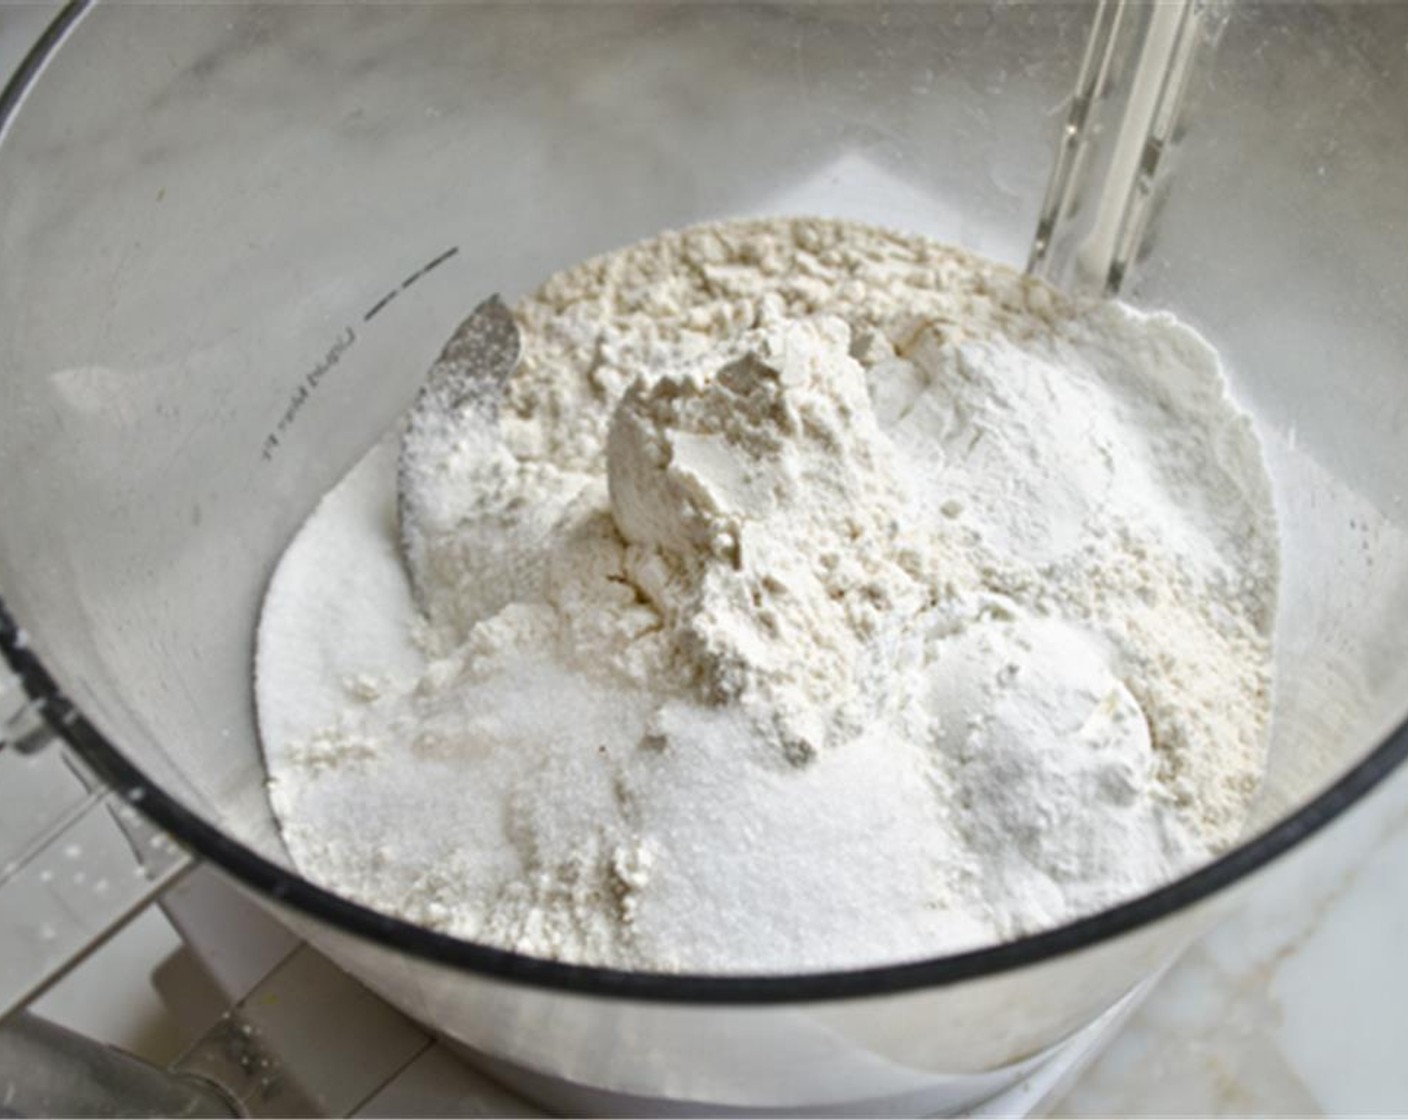 step 2 In the bowl of a food processor, combine the All-Purpose Flour (2 cups), Corn Starch (1/4 cup), Baking Powder (1 Tbsp), Baking Soda (1/4 tsp), Granulated Sugar (1 Tbsp) and Salt (1 1/4 tsp). Pulse a few times to mix.